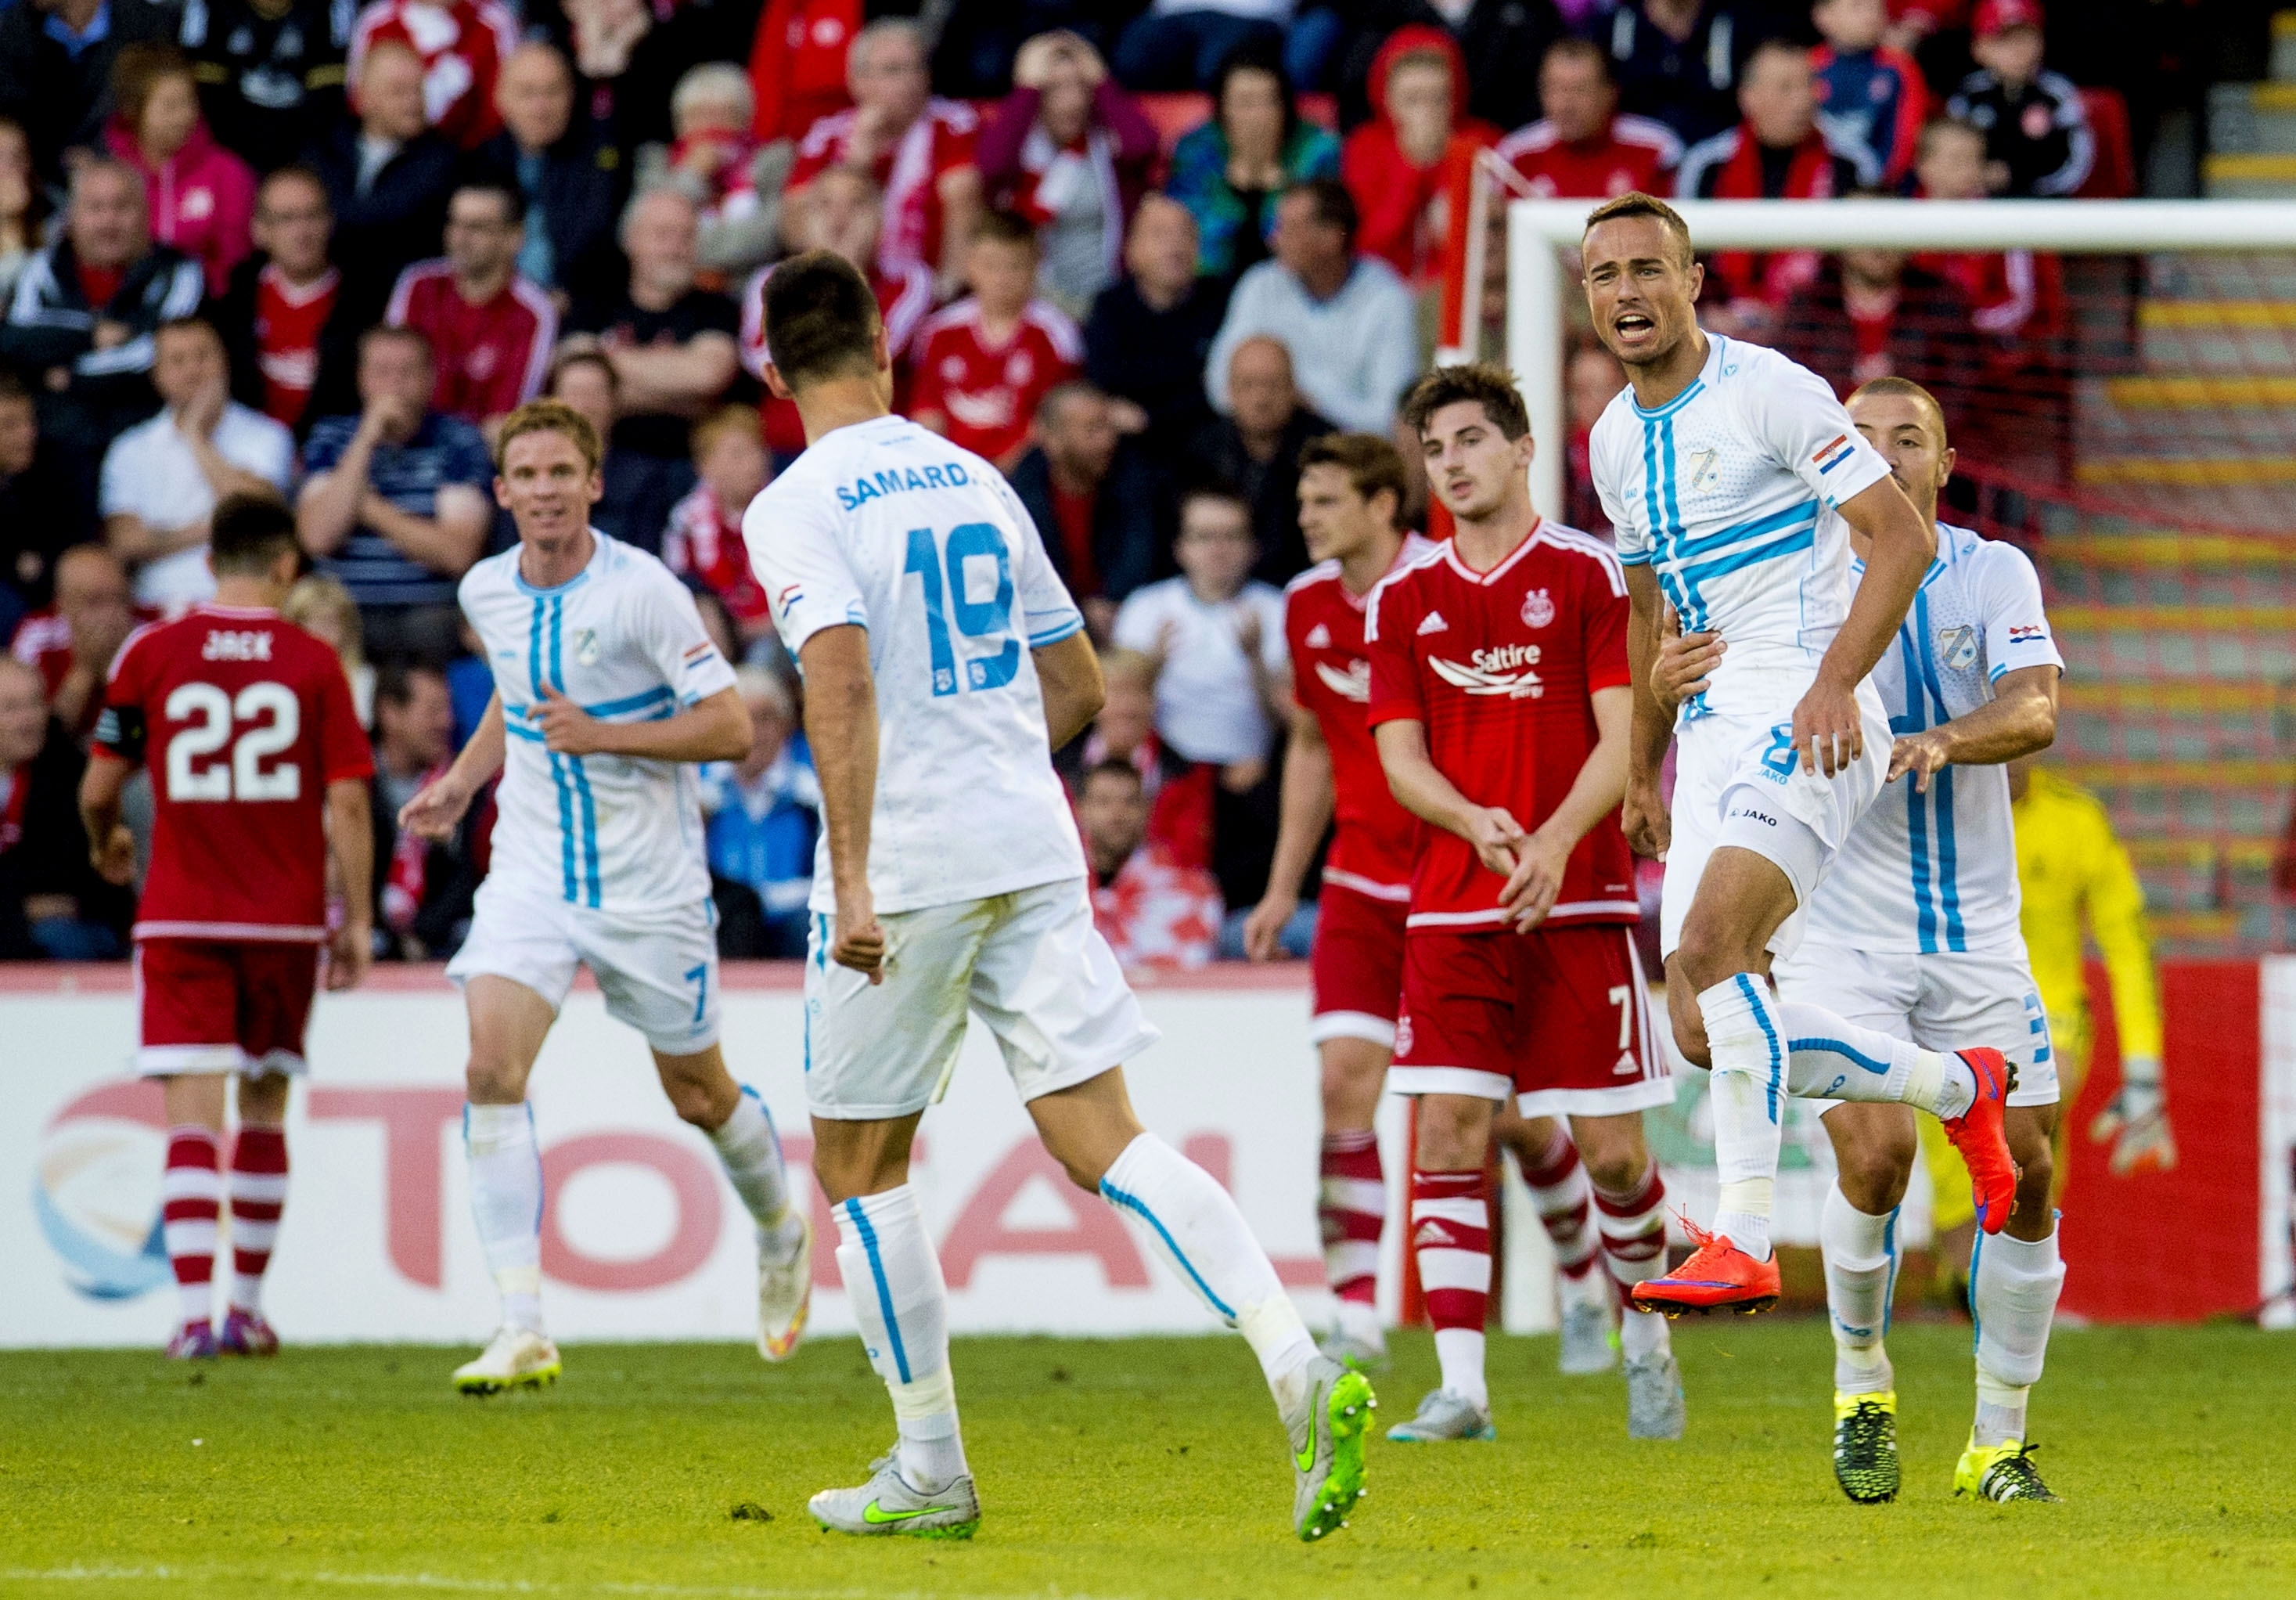 Reijka gave the Dons a fright when Zoran Kvrzic netted the Croats' second goal